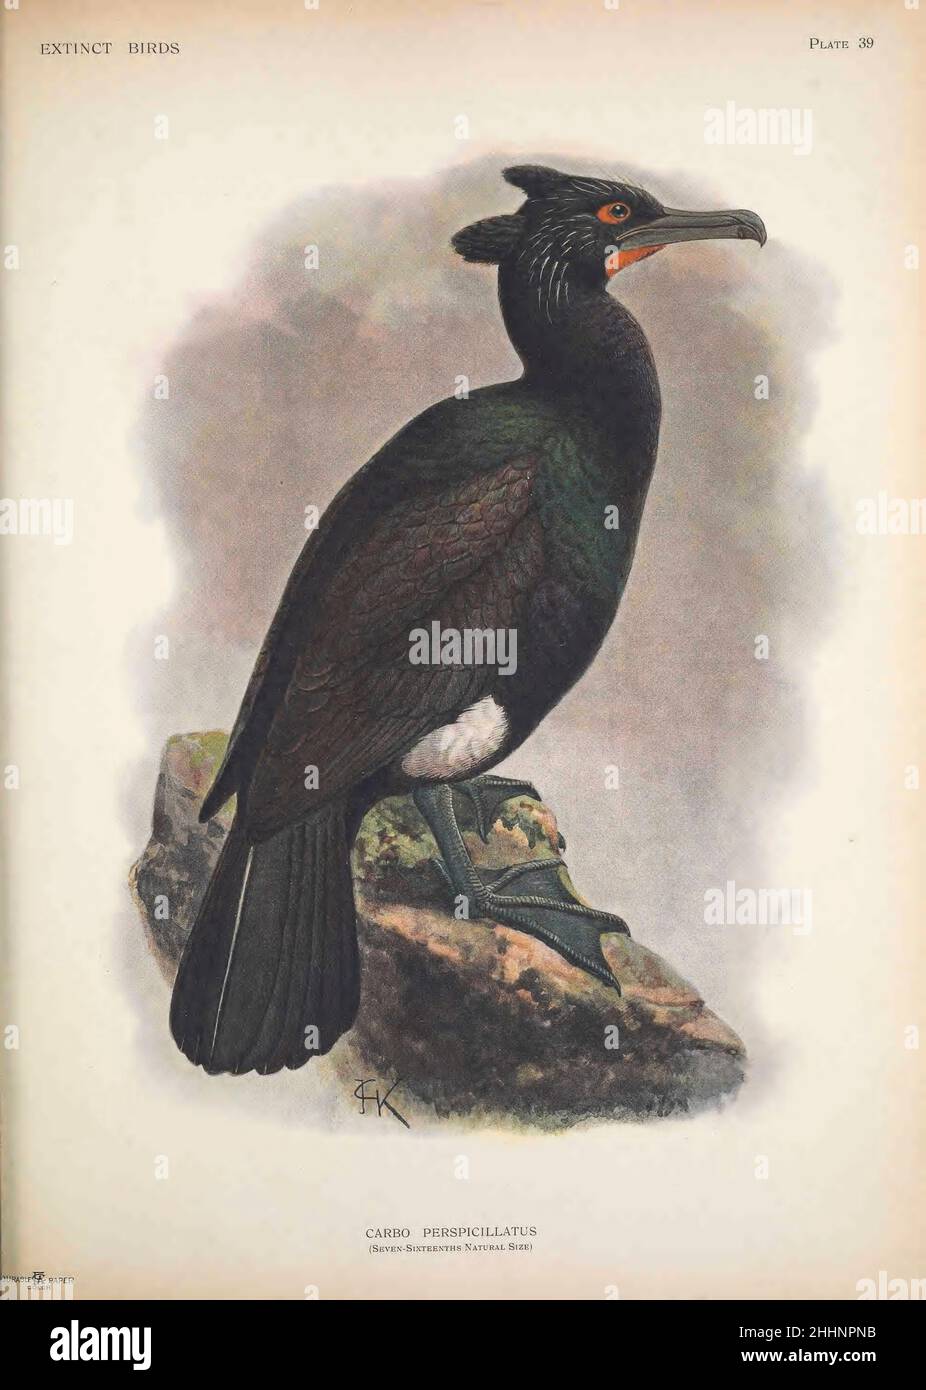 The spectacled cormorant or Pallas's cormorant (Urile perspicillatus here as Carbo perspicillatus) is an extinct marine bird of the cormorant family of seabirds that inhabited Bering Island and possibly other places in the Komandorski Islands and the nearby coast of Kamchatka in the far northeast of Russia. The modern distribution was shown to be a relic of a wider prehistoric distribution in 2018 when fossils of the species from 120,000 years ago were found in Japan. It is the largest species of cormorant known to have existed. by John Gerrard Keulemans from ' Extinct birds ' : an attempt to Stock Photo